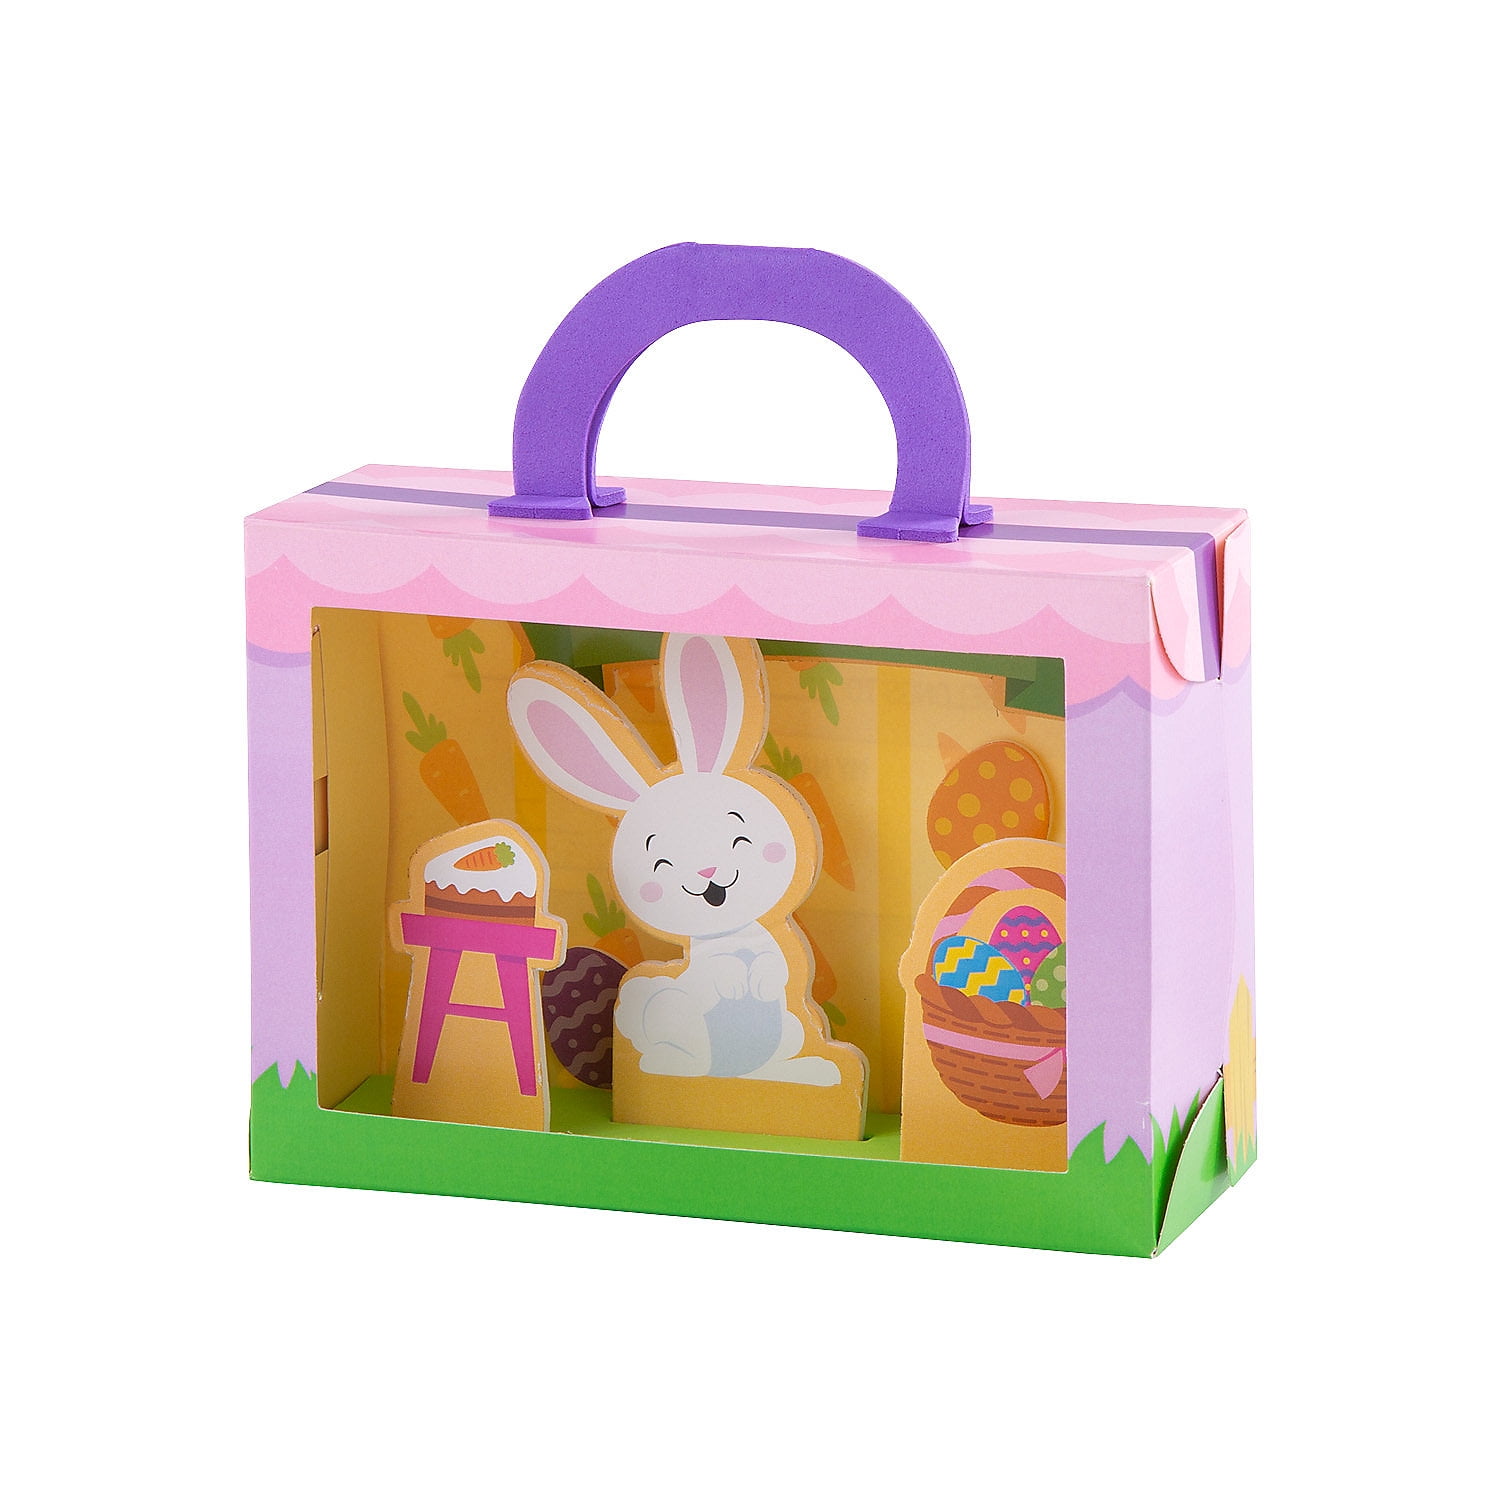 Pet Easter Bunny Home Craft Kit - Makes 12 